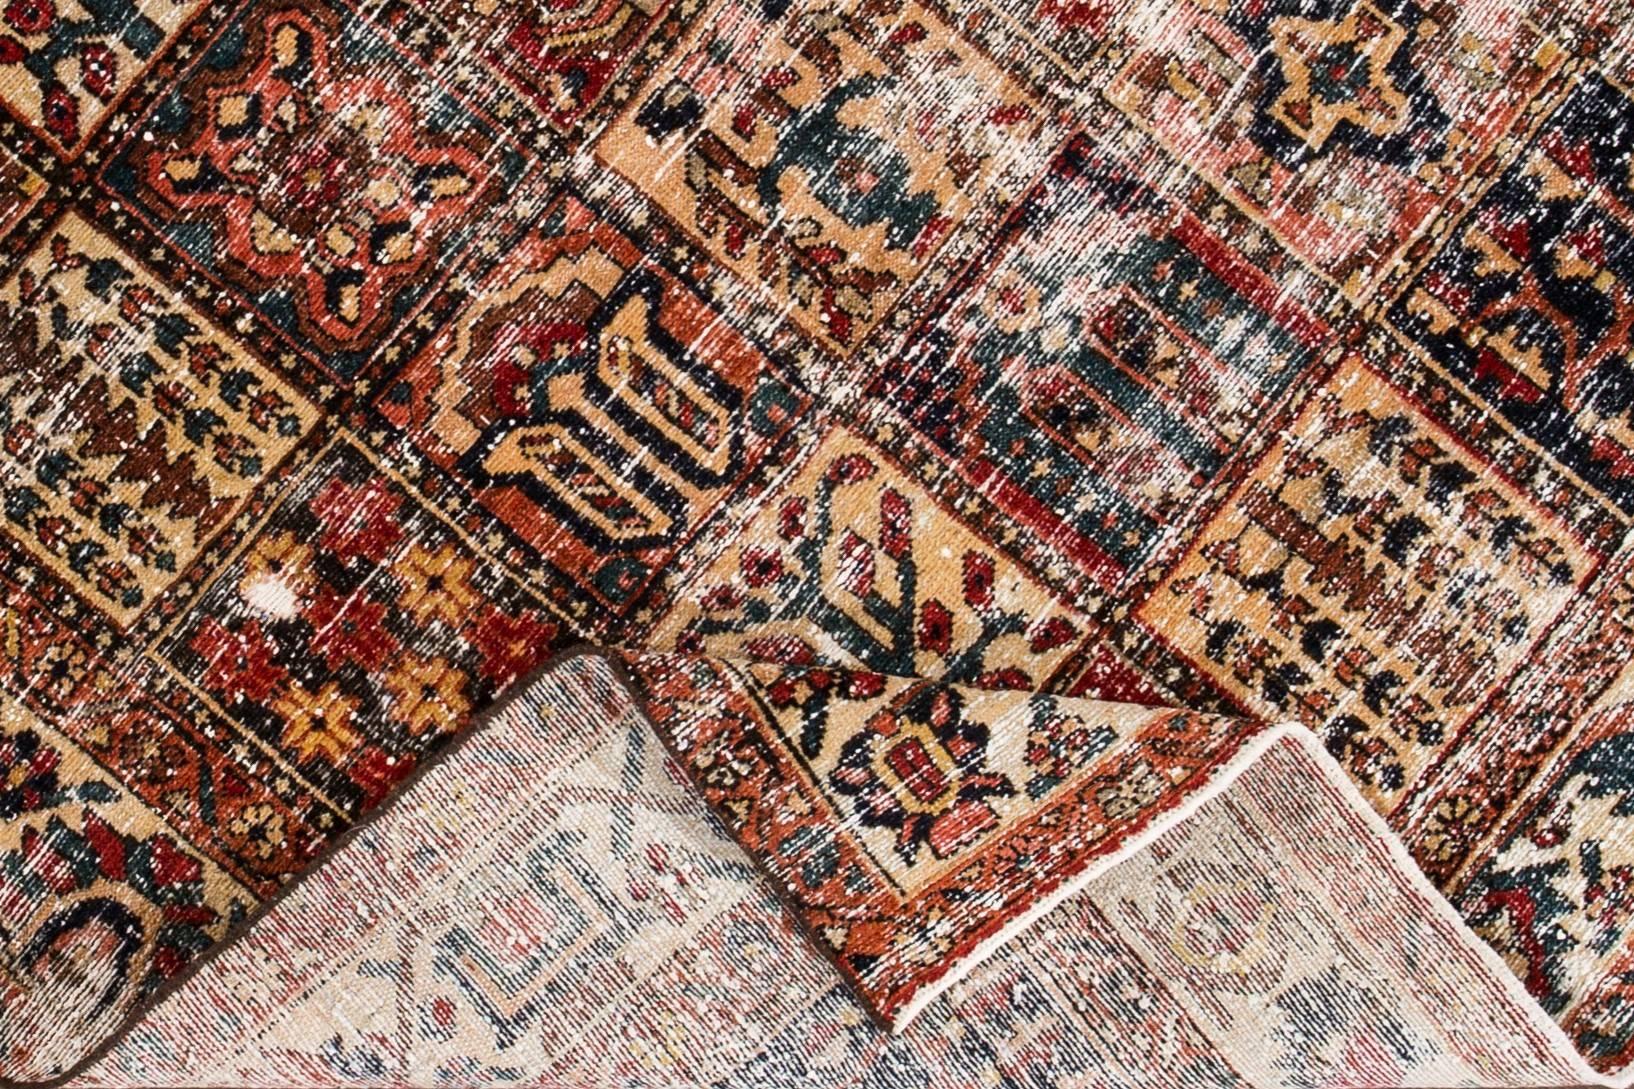 1930s vintage, square-shaped Persian Tabriz carpet. This distressed piece features a geometric, quilt-style design accented in rust, blues, and earth tones. Measures: 5.03 x 6.08.